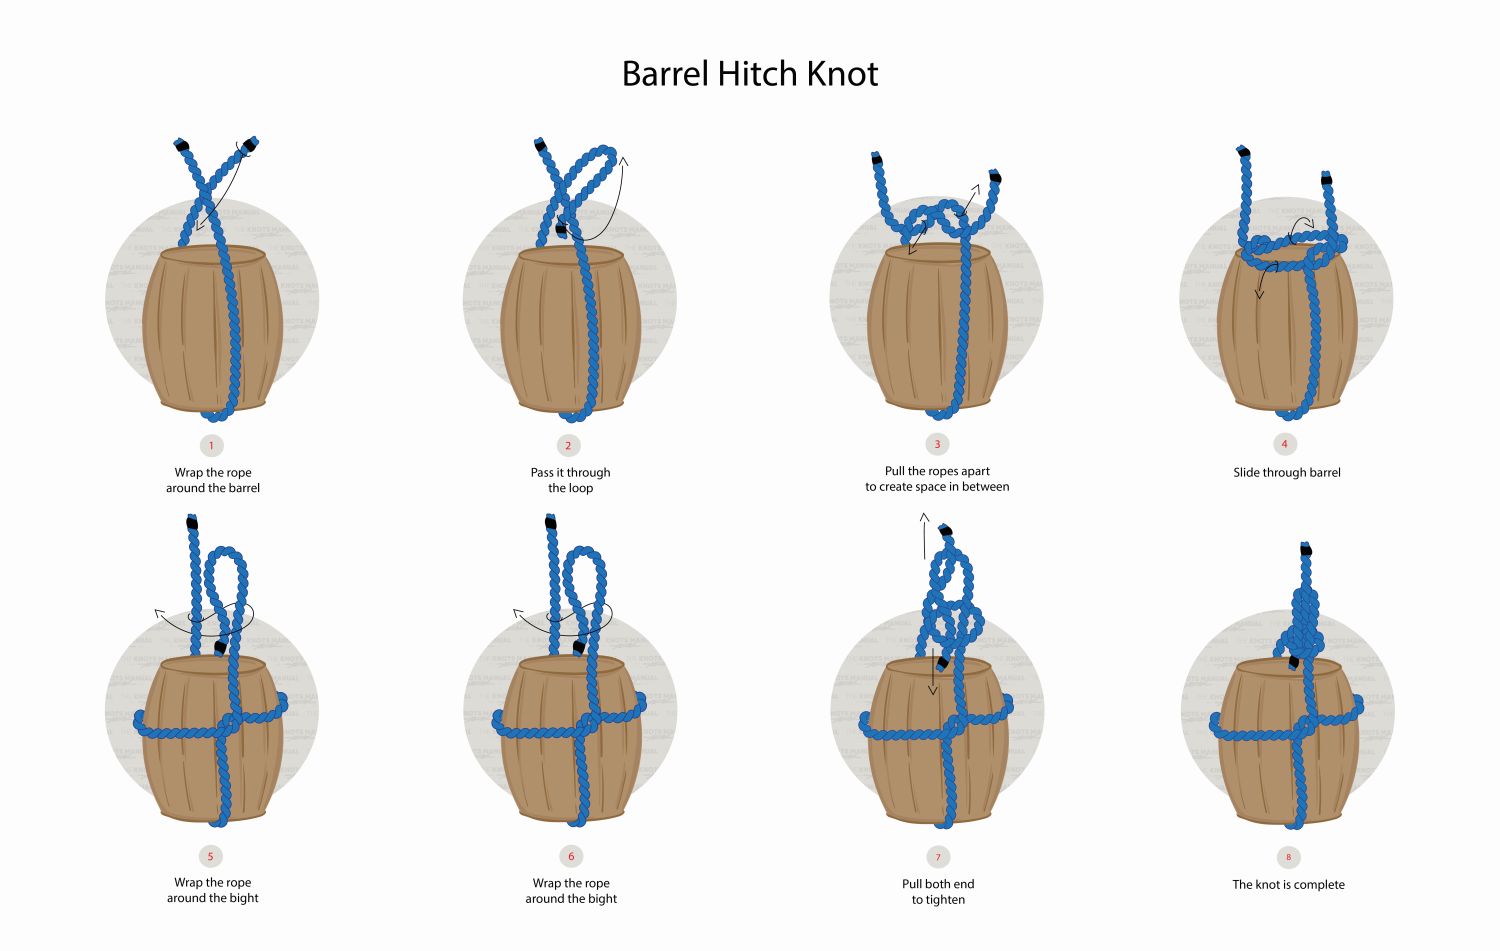 How To Tie A Barrel Hitch Knot